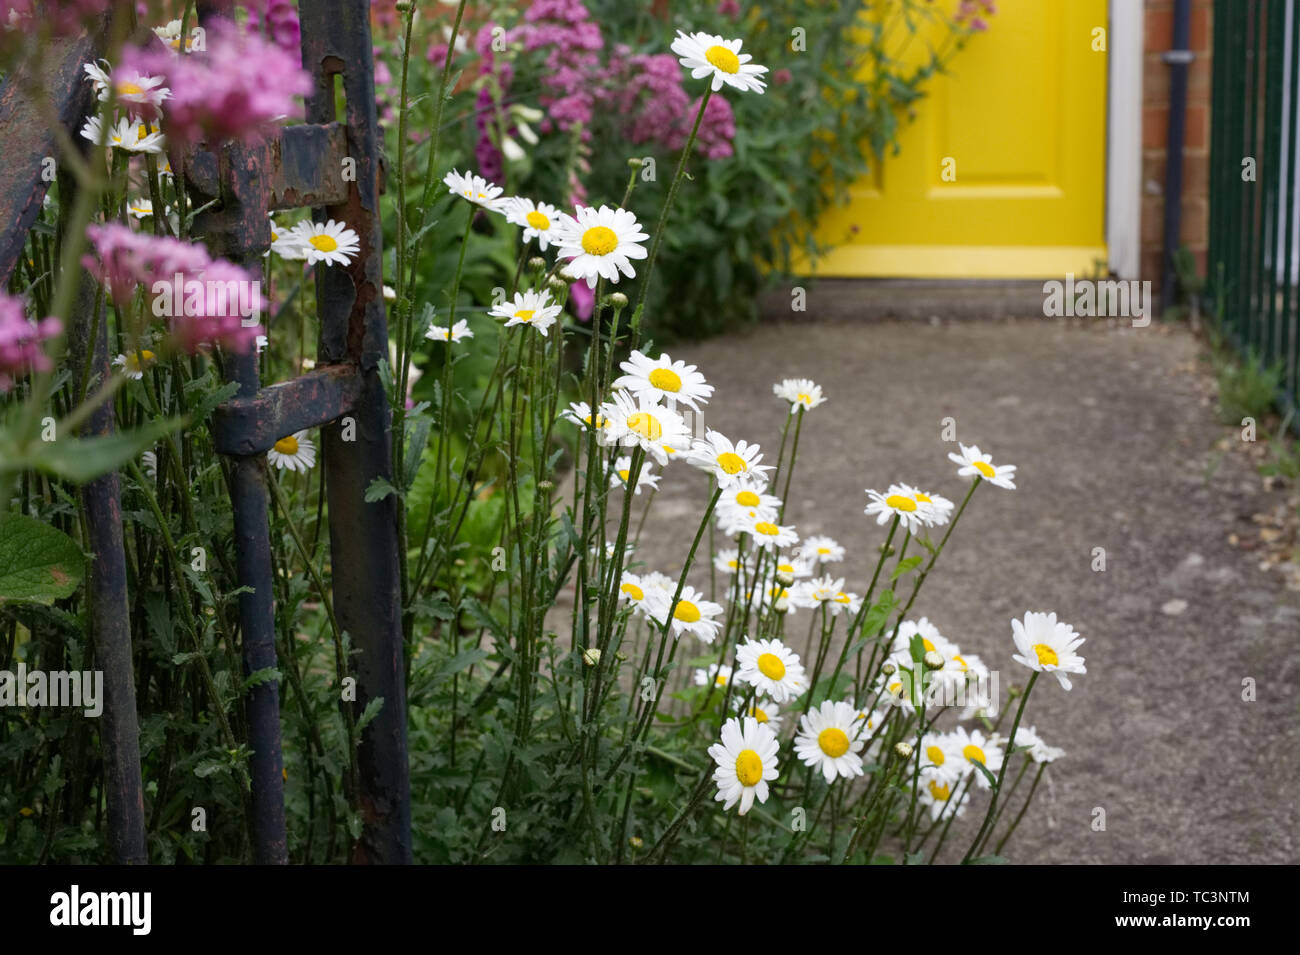 Leucanthemum vulgare. Oxeye daisies and Centranthus ruber lining a garden path. Stock Photo